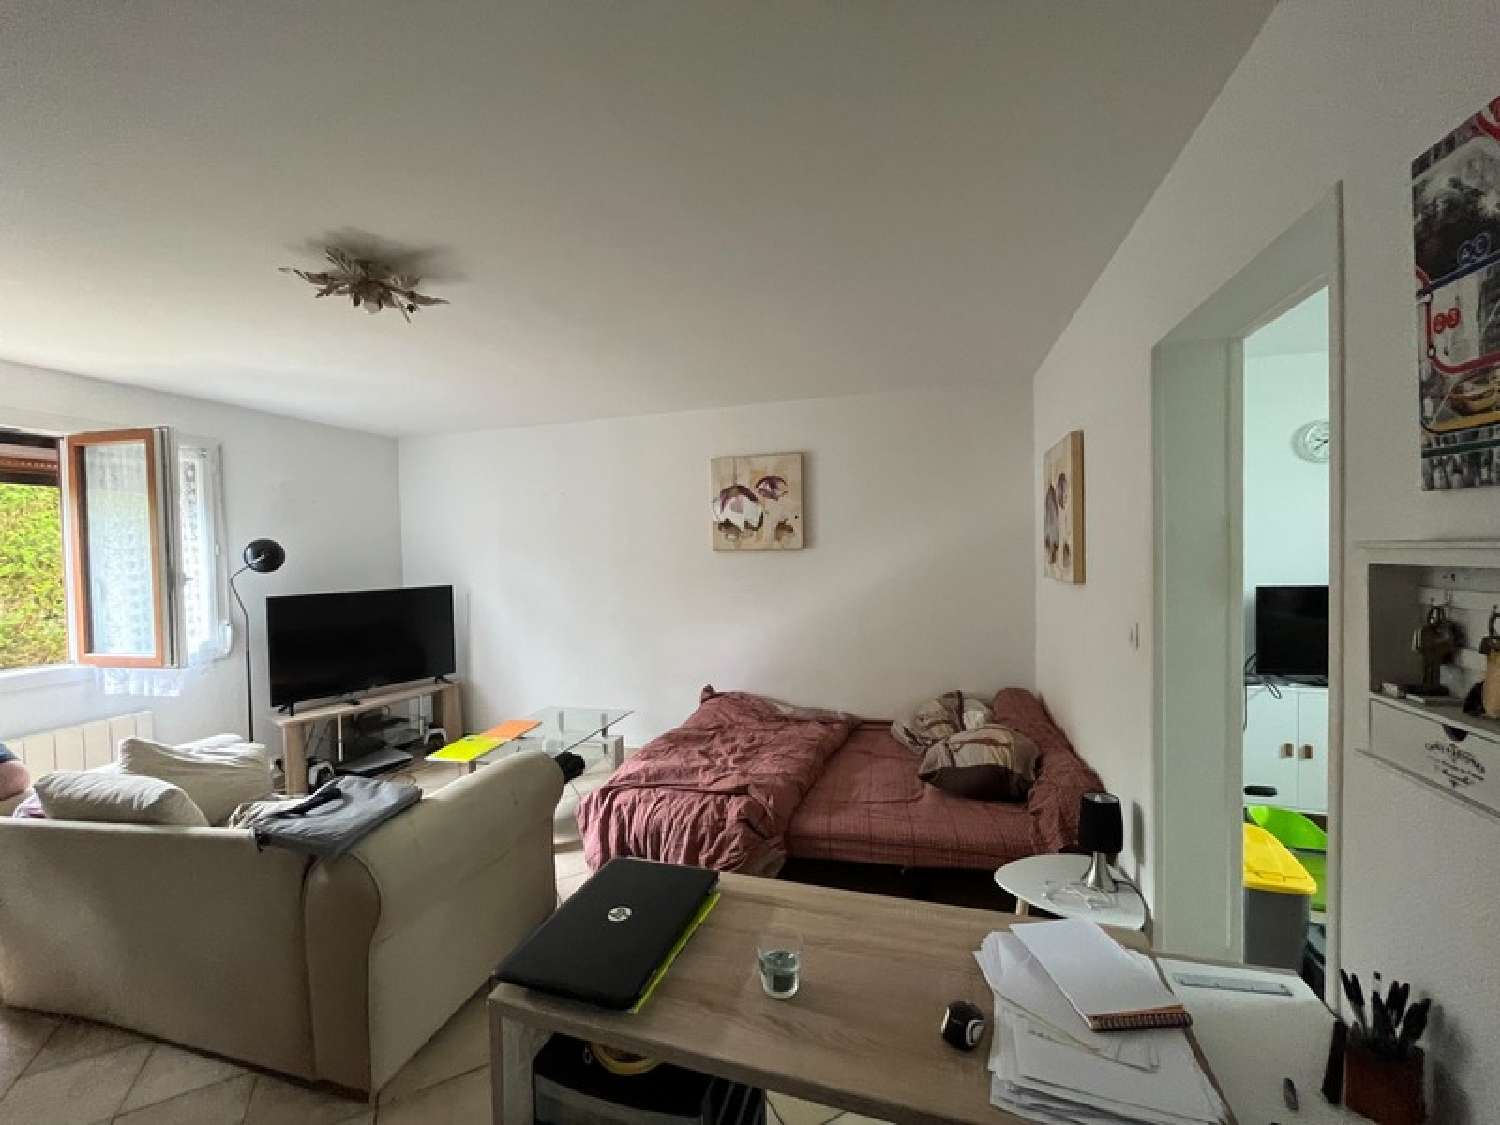  à vendre appartement Rivery Somme 1